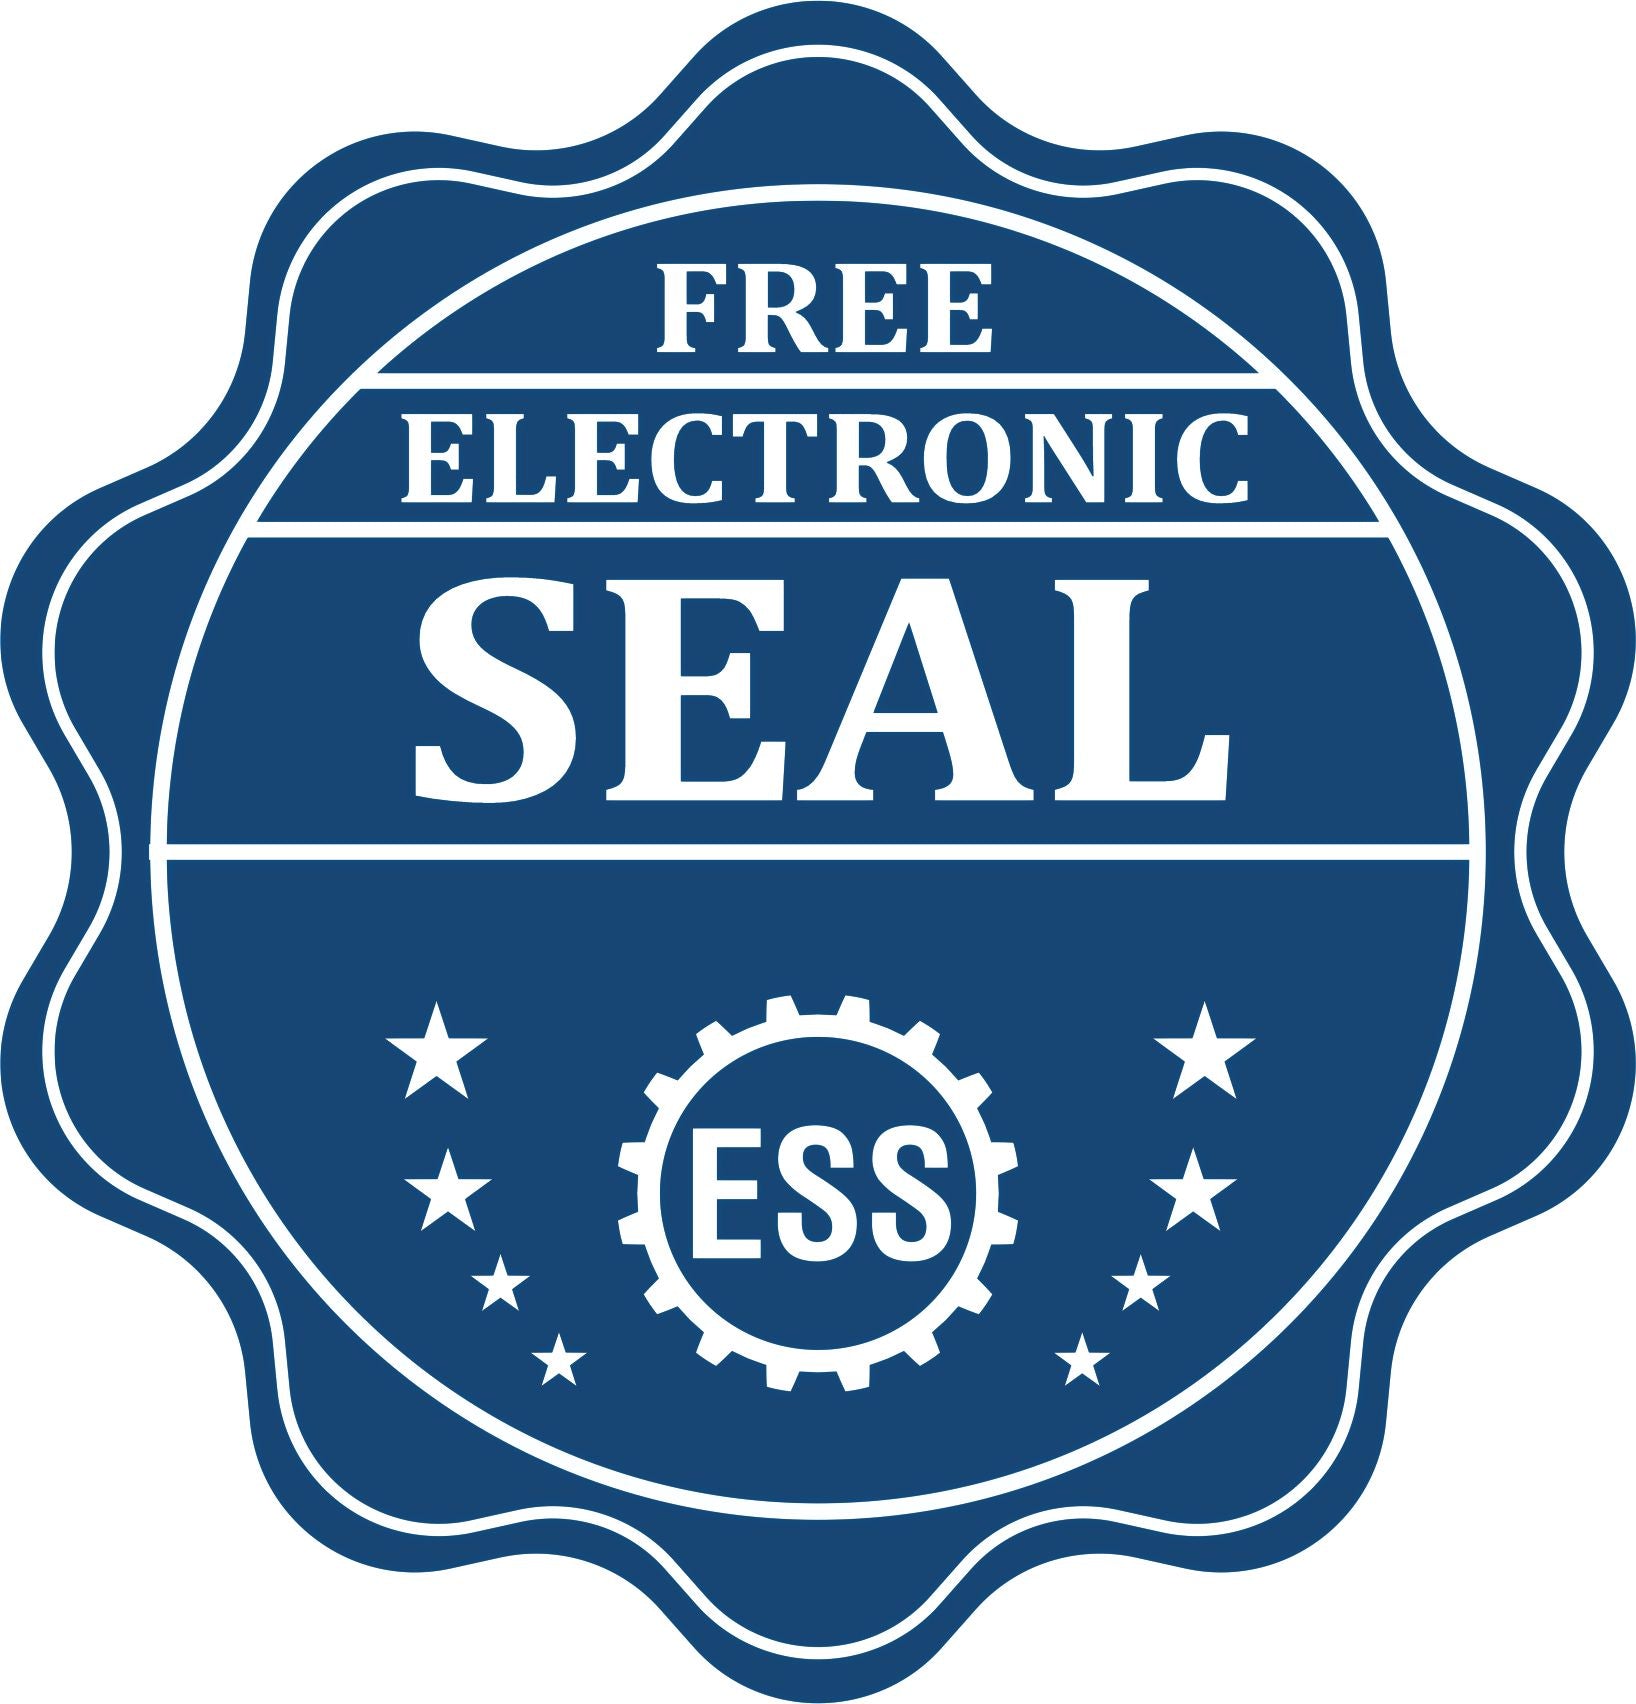 A badge showing a free electronic seal for the Premium MaxLight Pre-Inked New Mexico Engineering Stamp with stars and the ESS gear on the emblem.